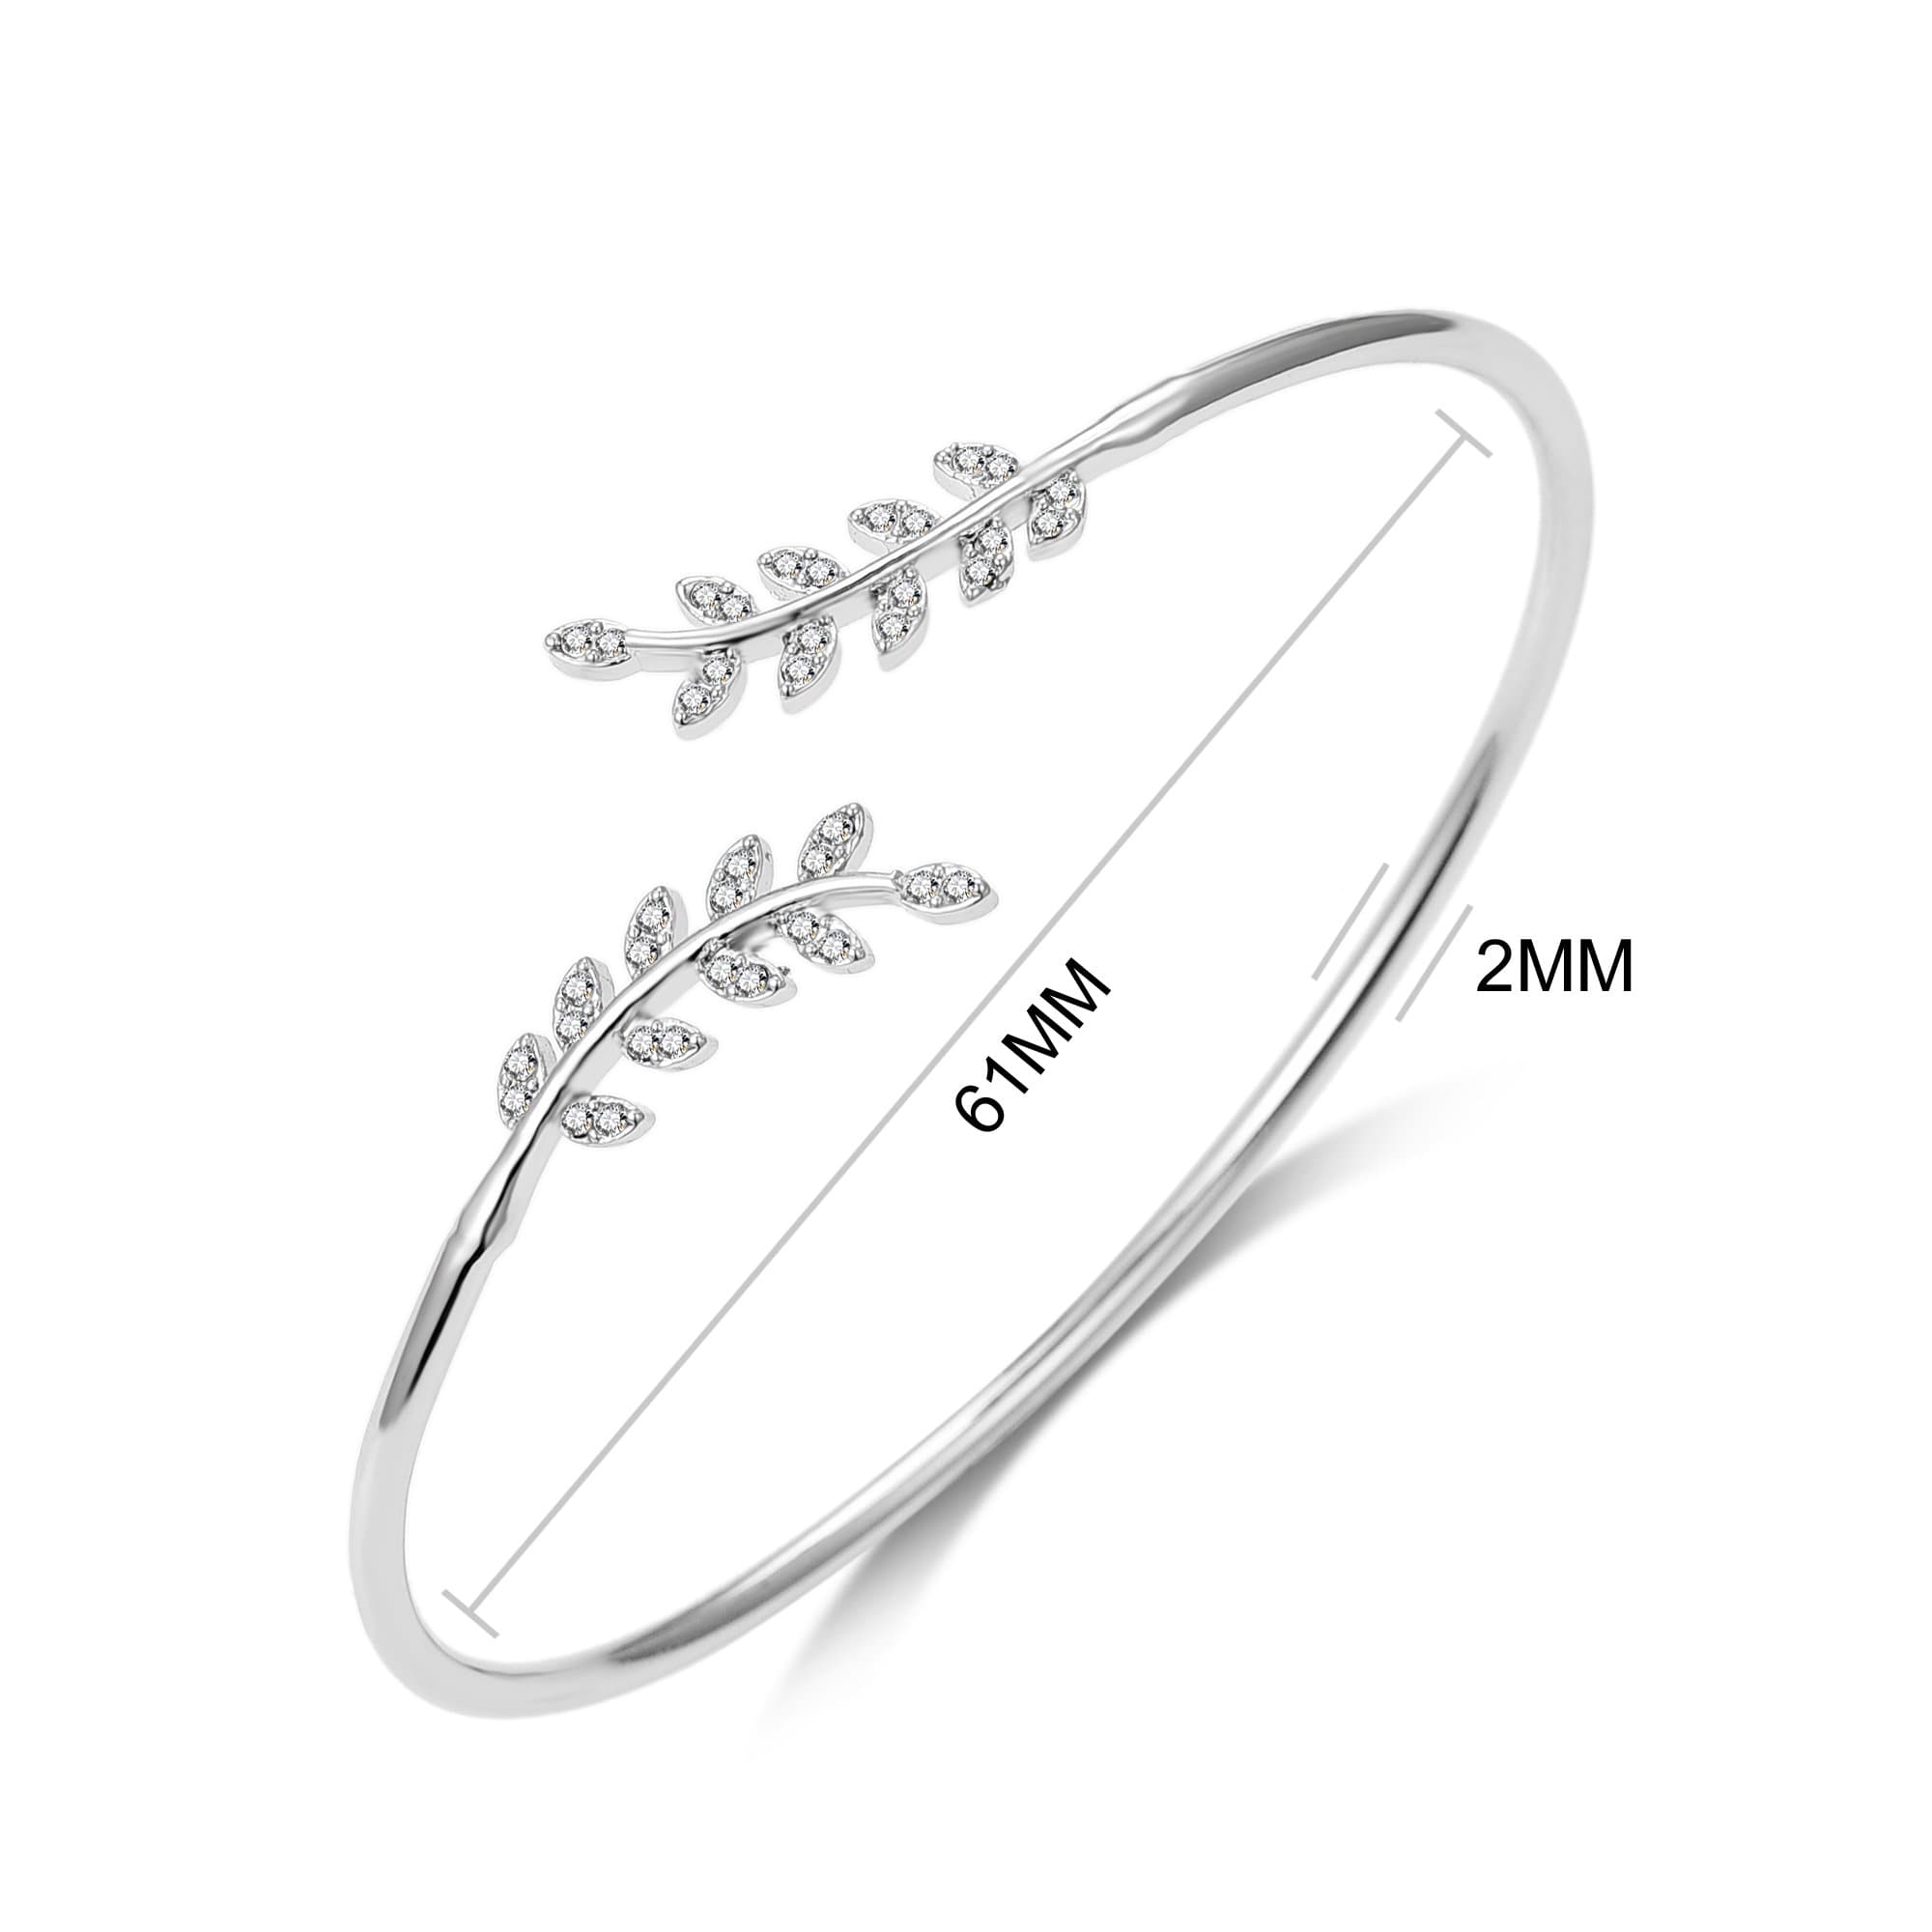 Silver Plated Leaf Bangle Created with Zircondia® Crystals